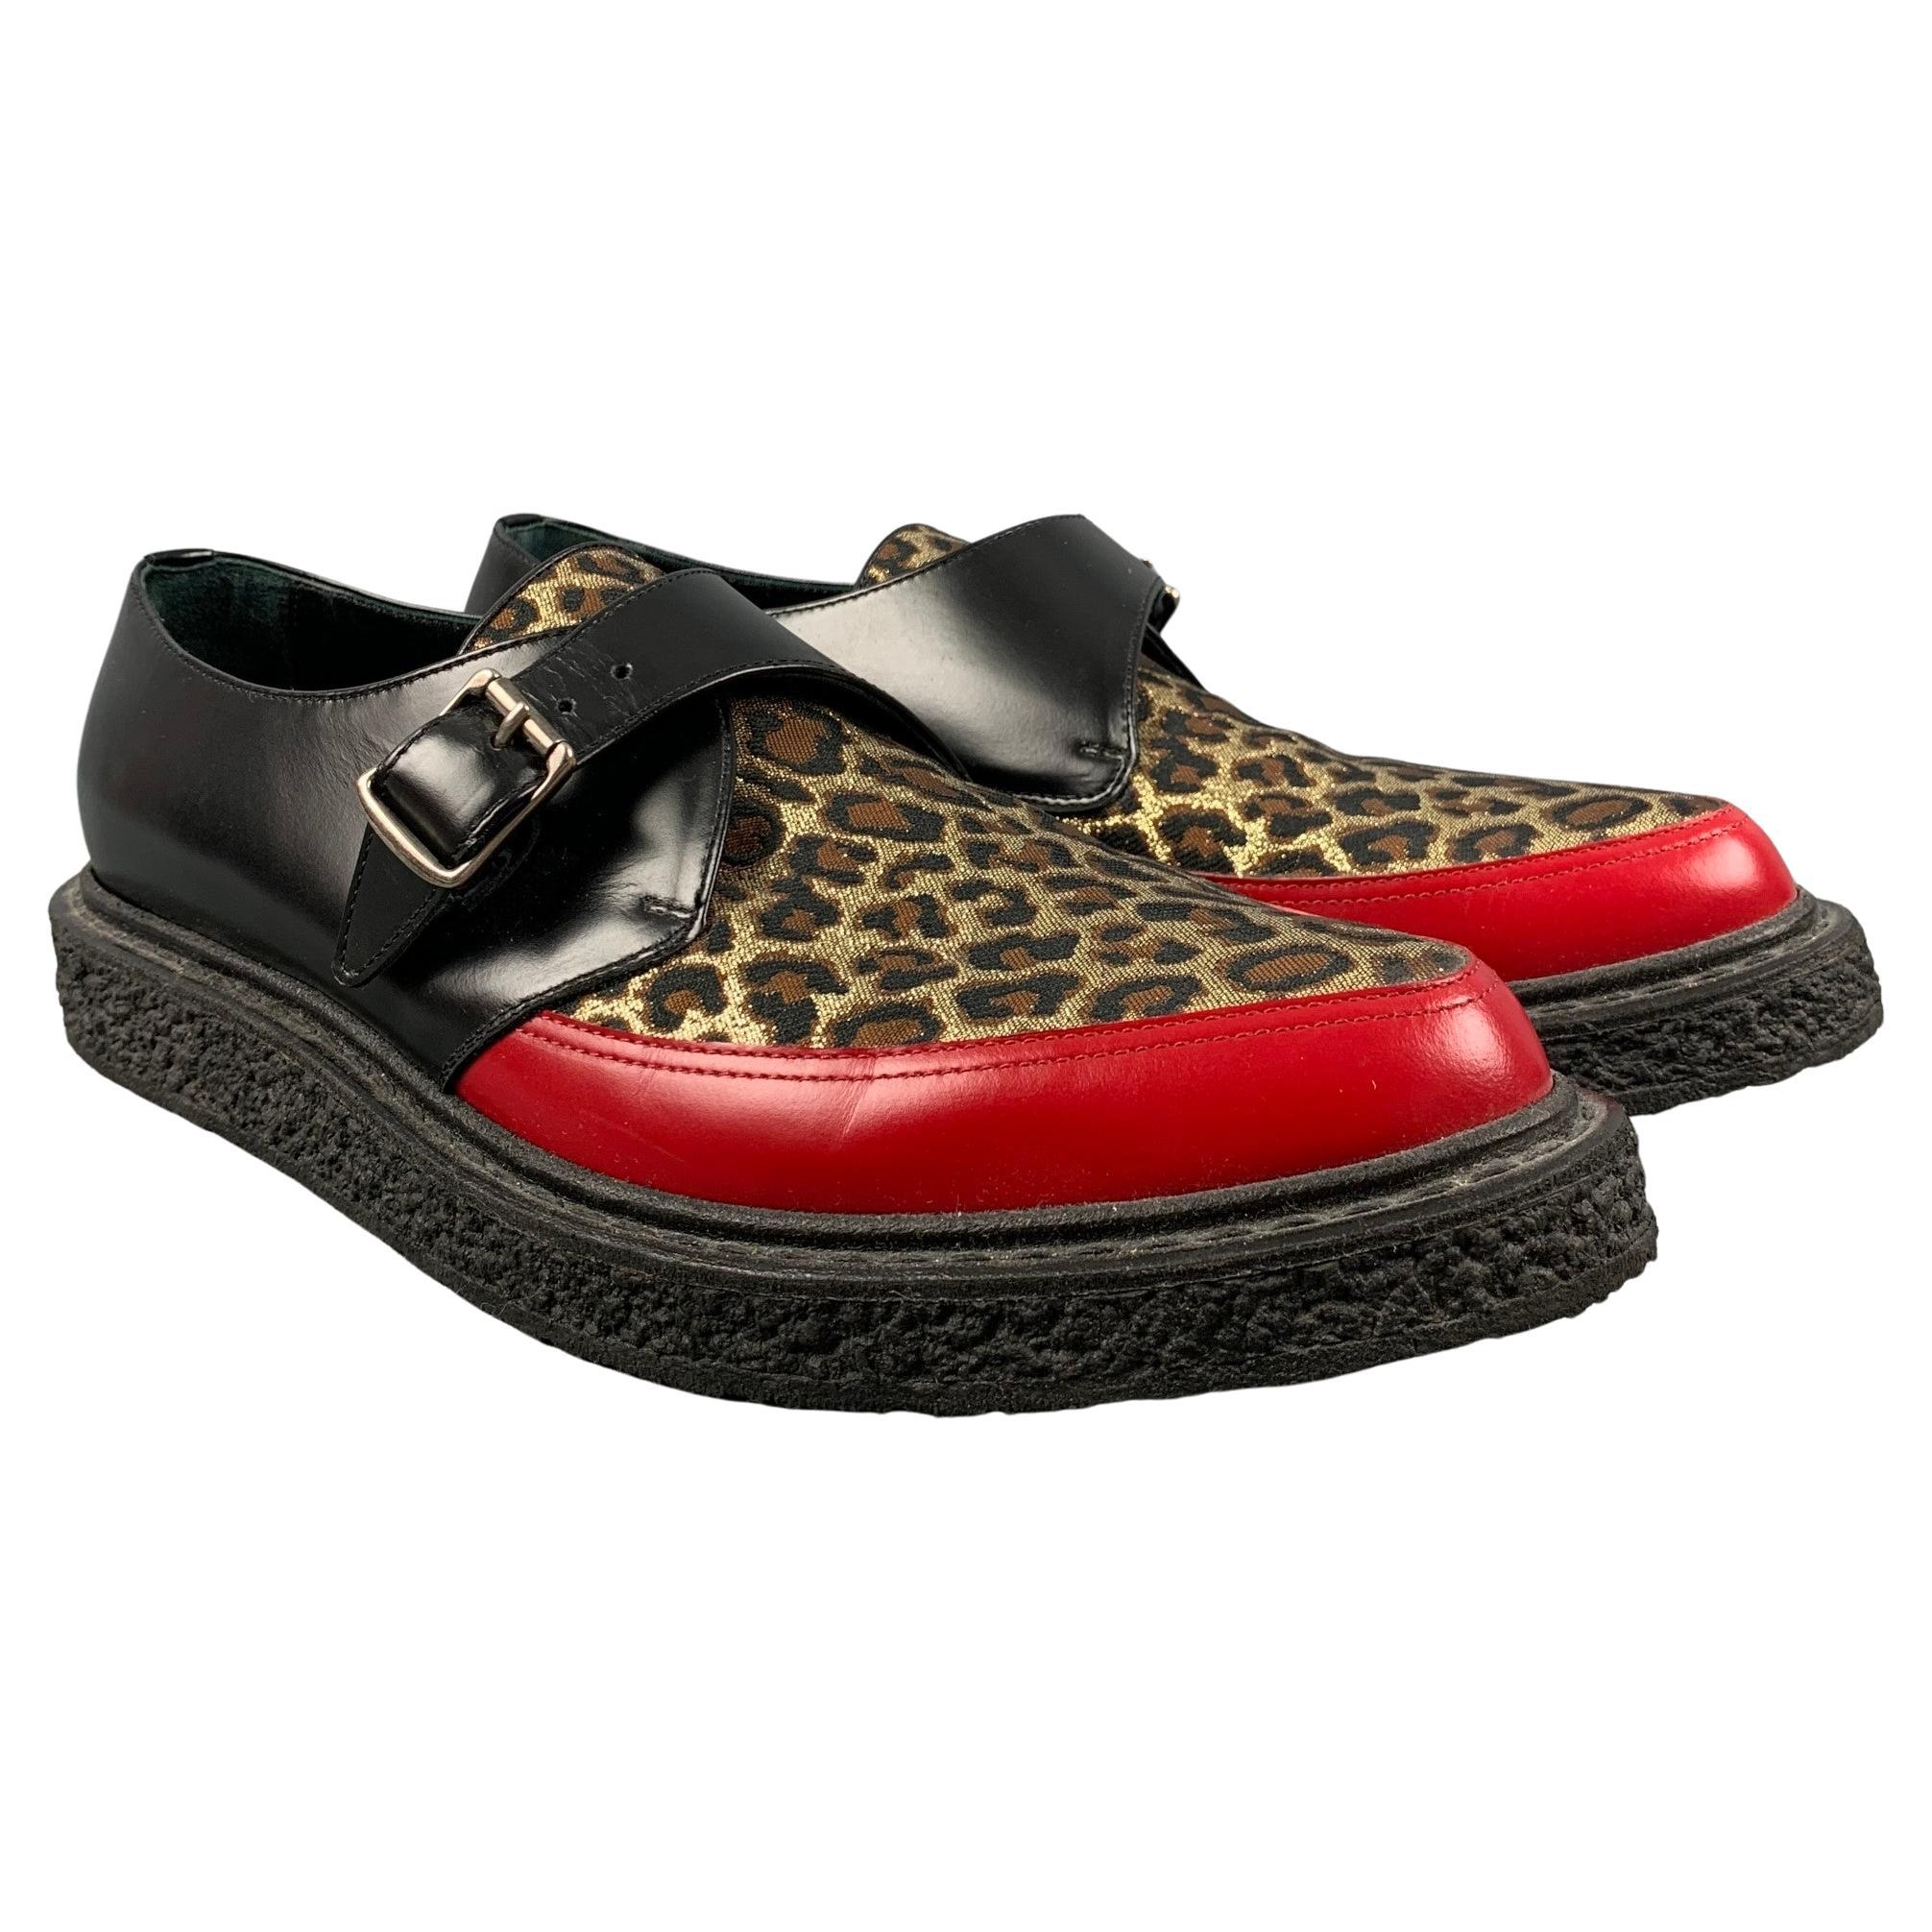 SAINT LAURENT Size 12 Black Red & Gold Mixed Materials Leather Loafers